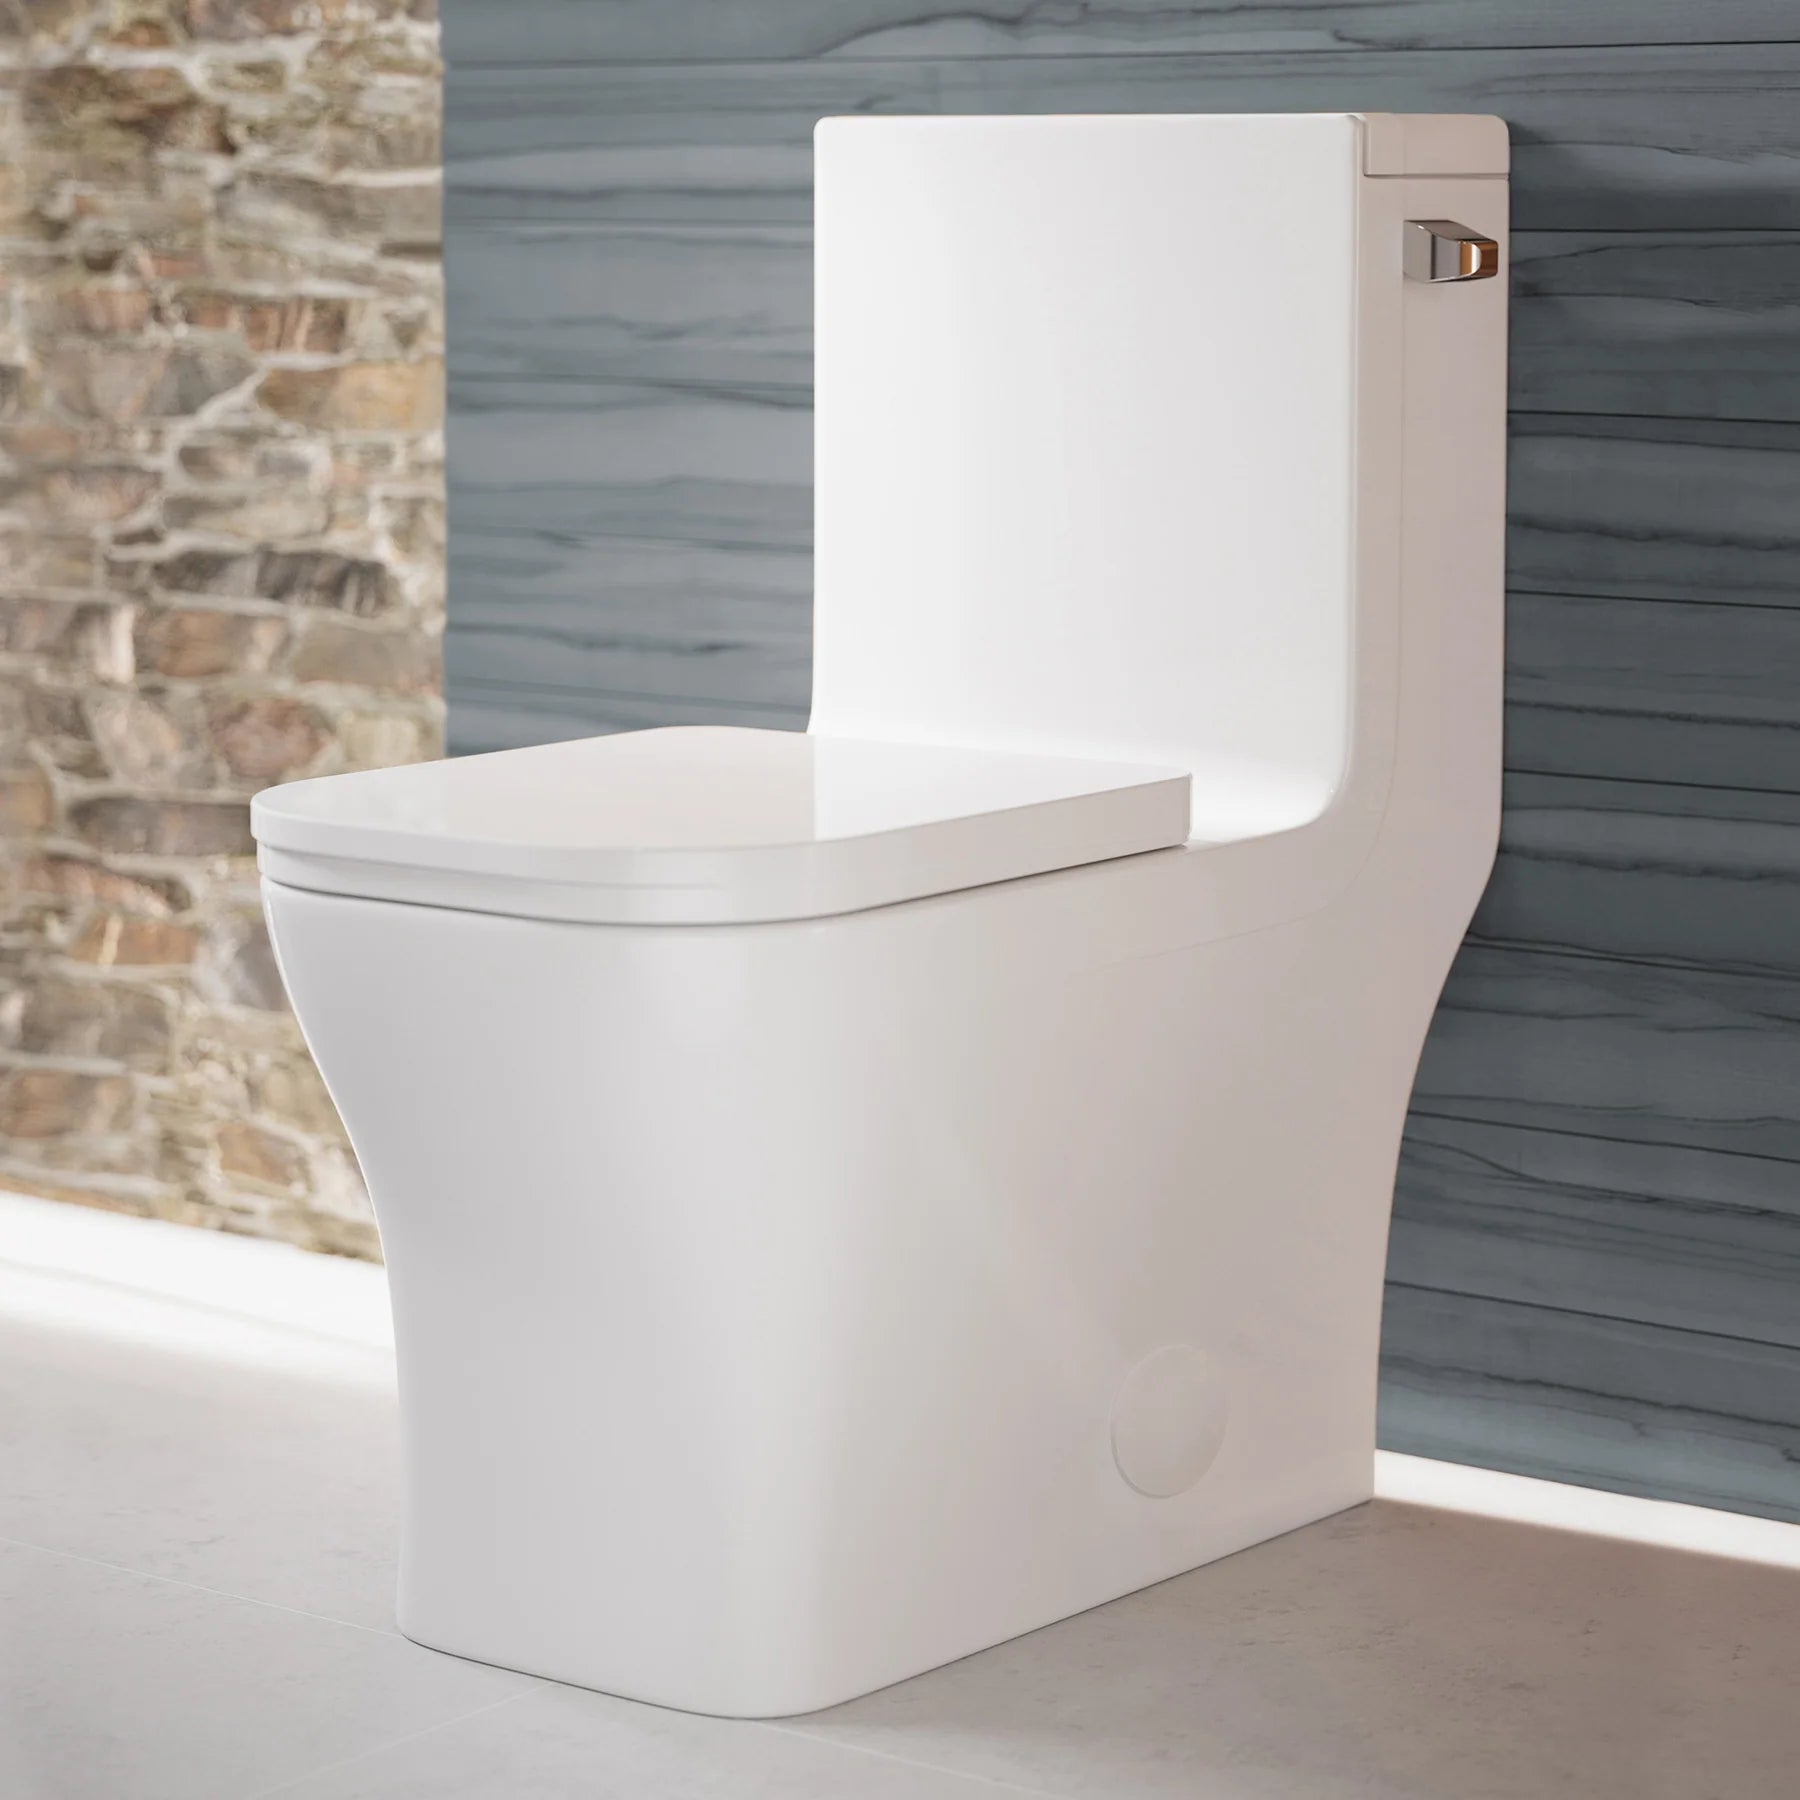 Swiss Madison Concorde One Piece Square Right Side Flush Handle Toilet 1.28 gpf - SM-1T105